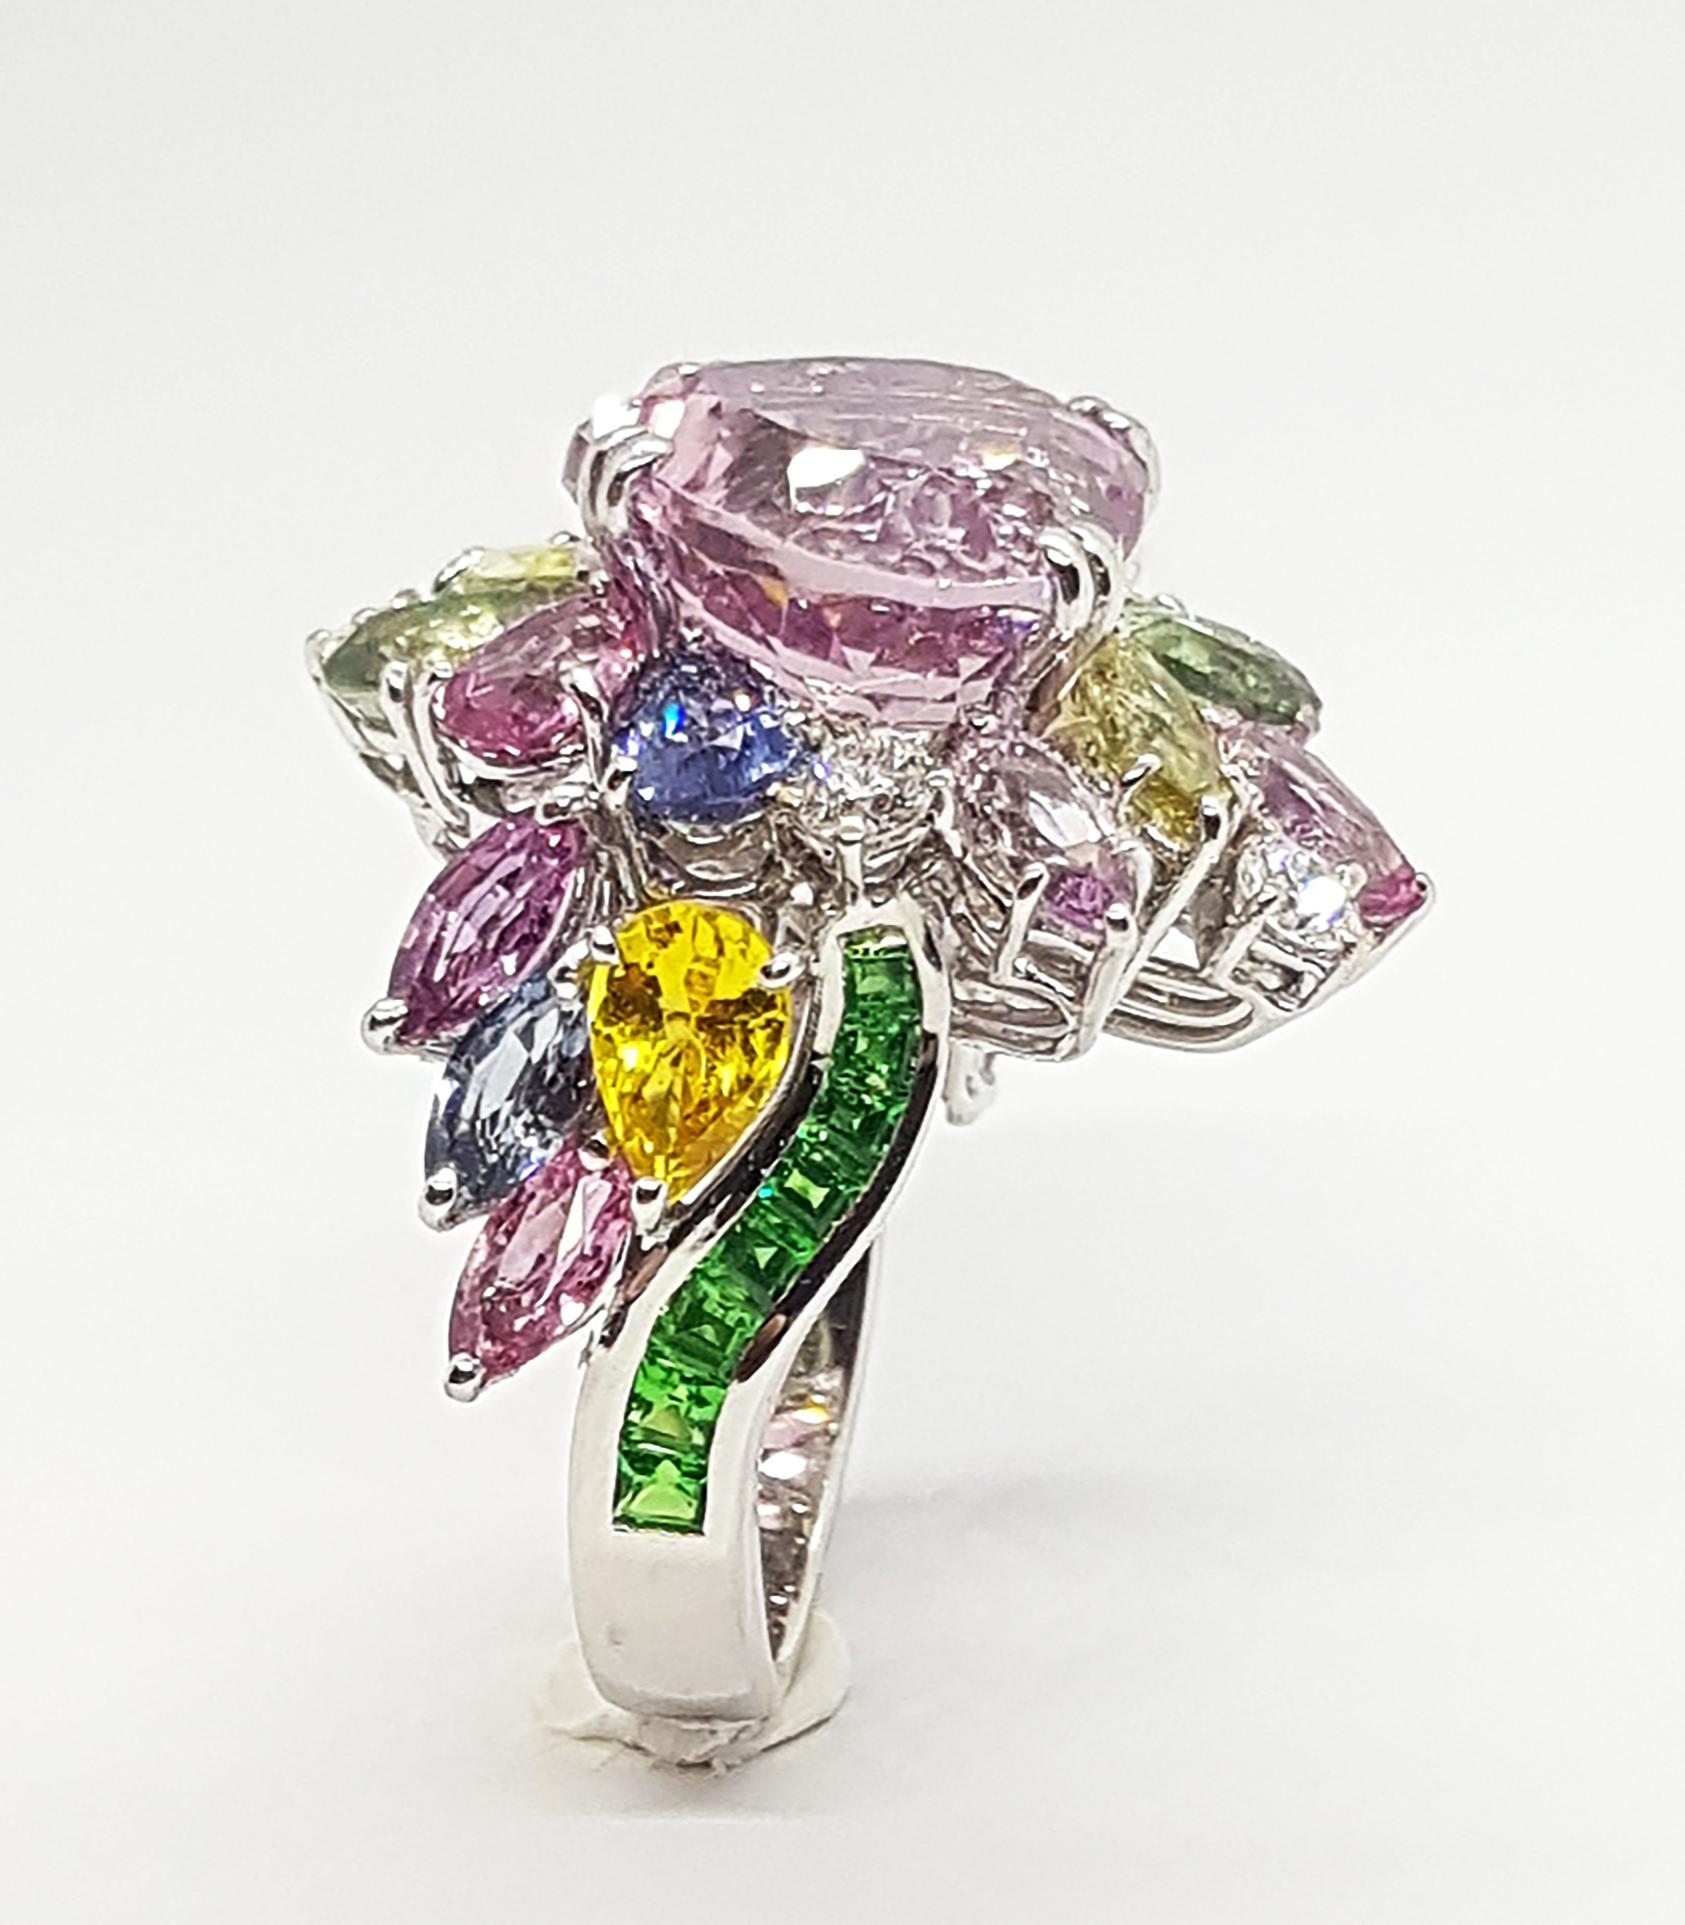 Kunzite 8.90 carats with Rainbow Colour Sapphire 6.97 carats, Tsavorite 0.90 carat and Diamond 0.29 carat Ring set in 18 Karat White Gold Settings

Width:  2.0 cm 
Length: 2.6 cm
Ring Size: 52
Total Weight: 12.96 grams

